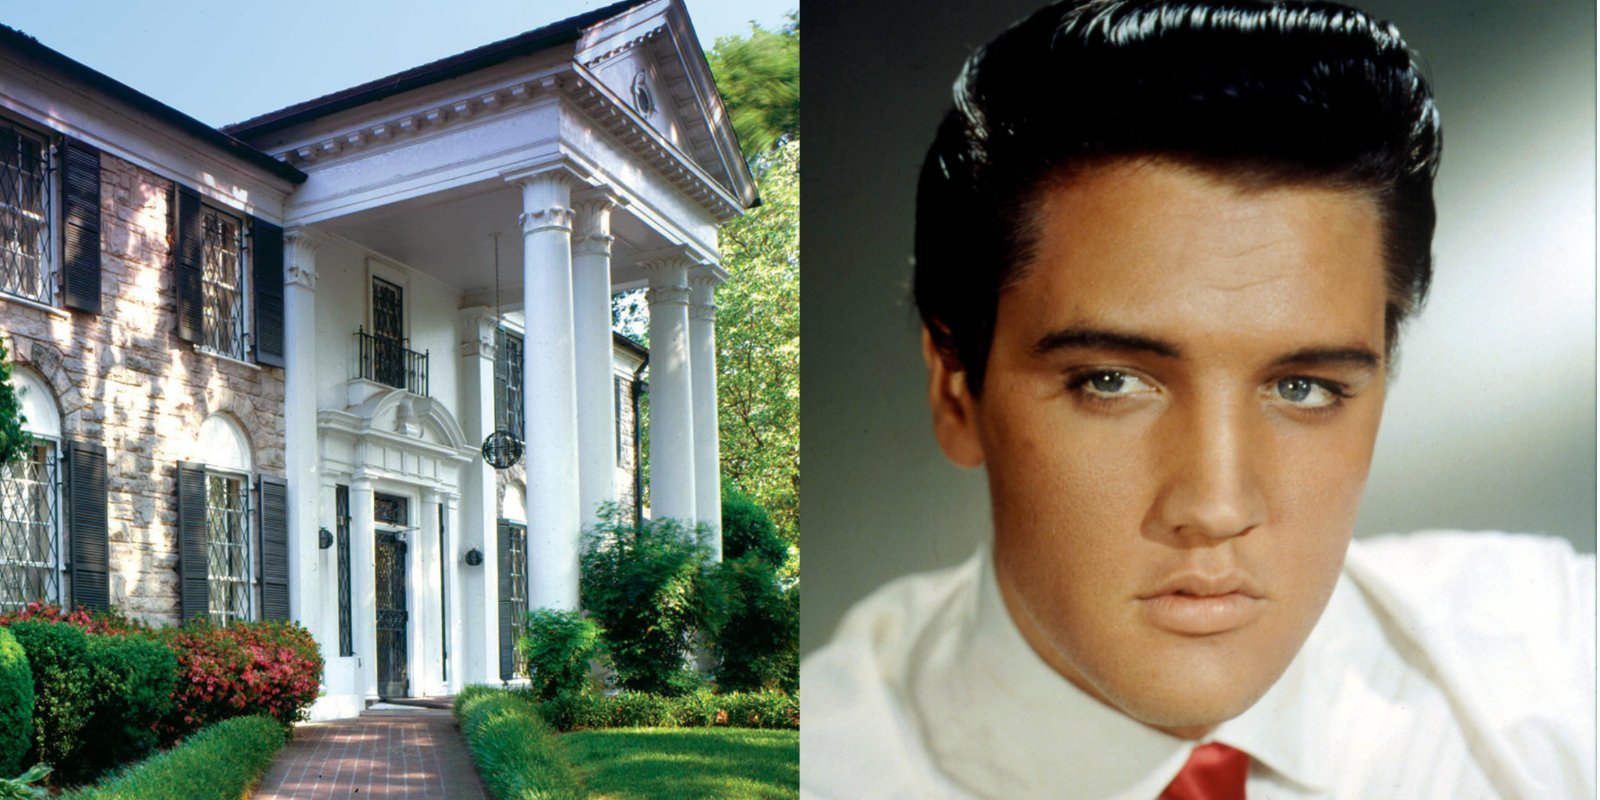 Graceland’s Most Popular Room Has a Secret Window Used for Entertaining Elvis Presley and his Friends